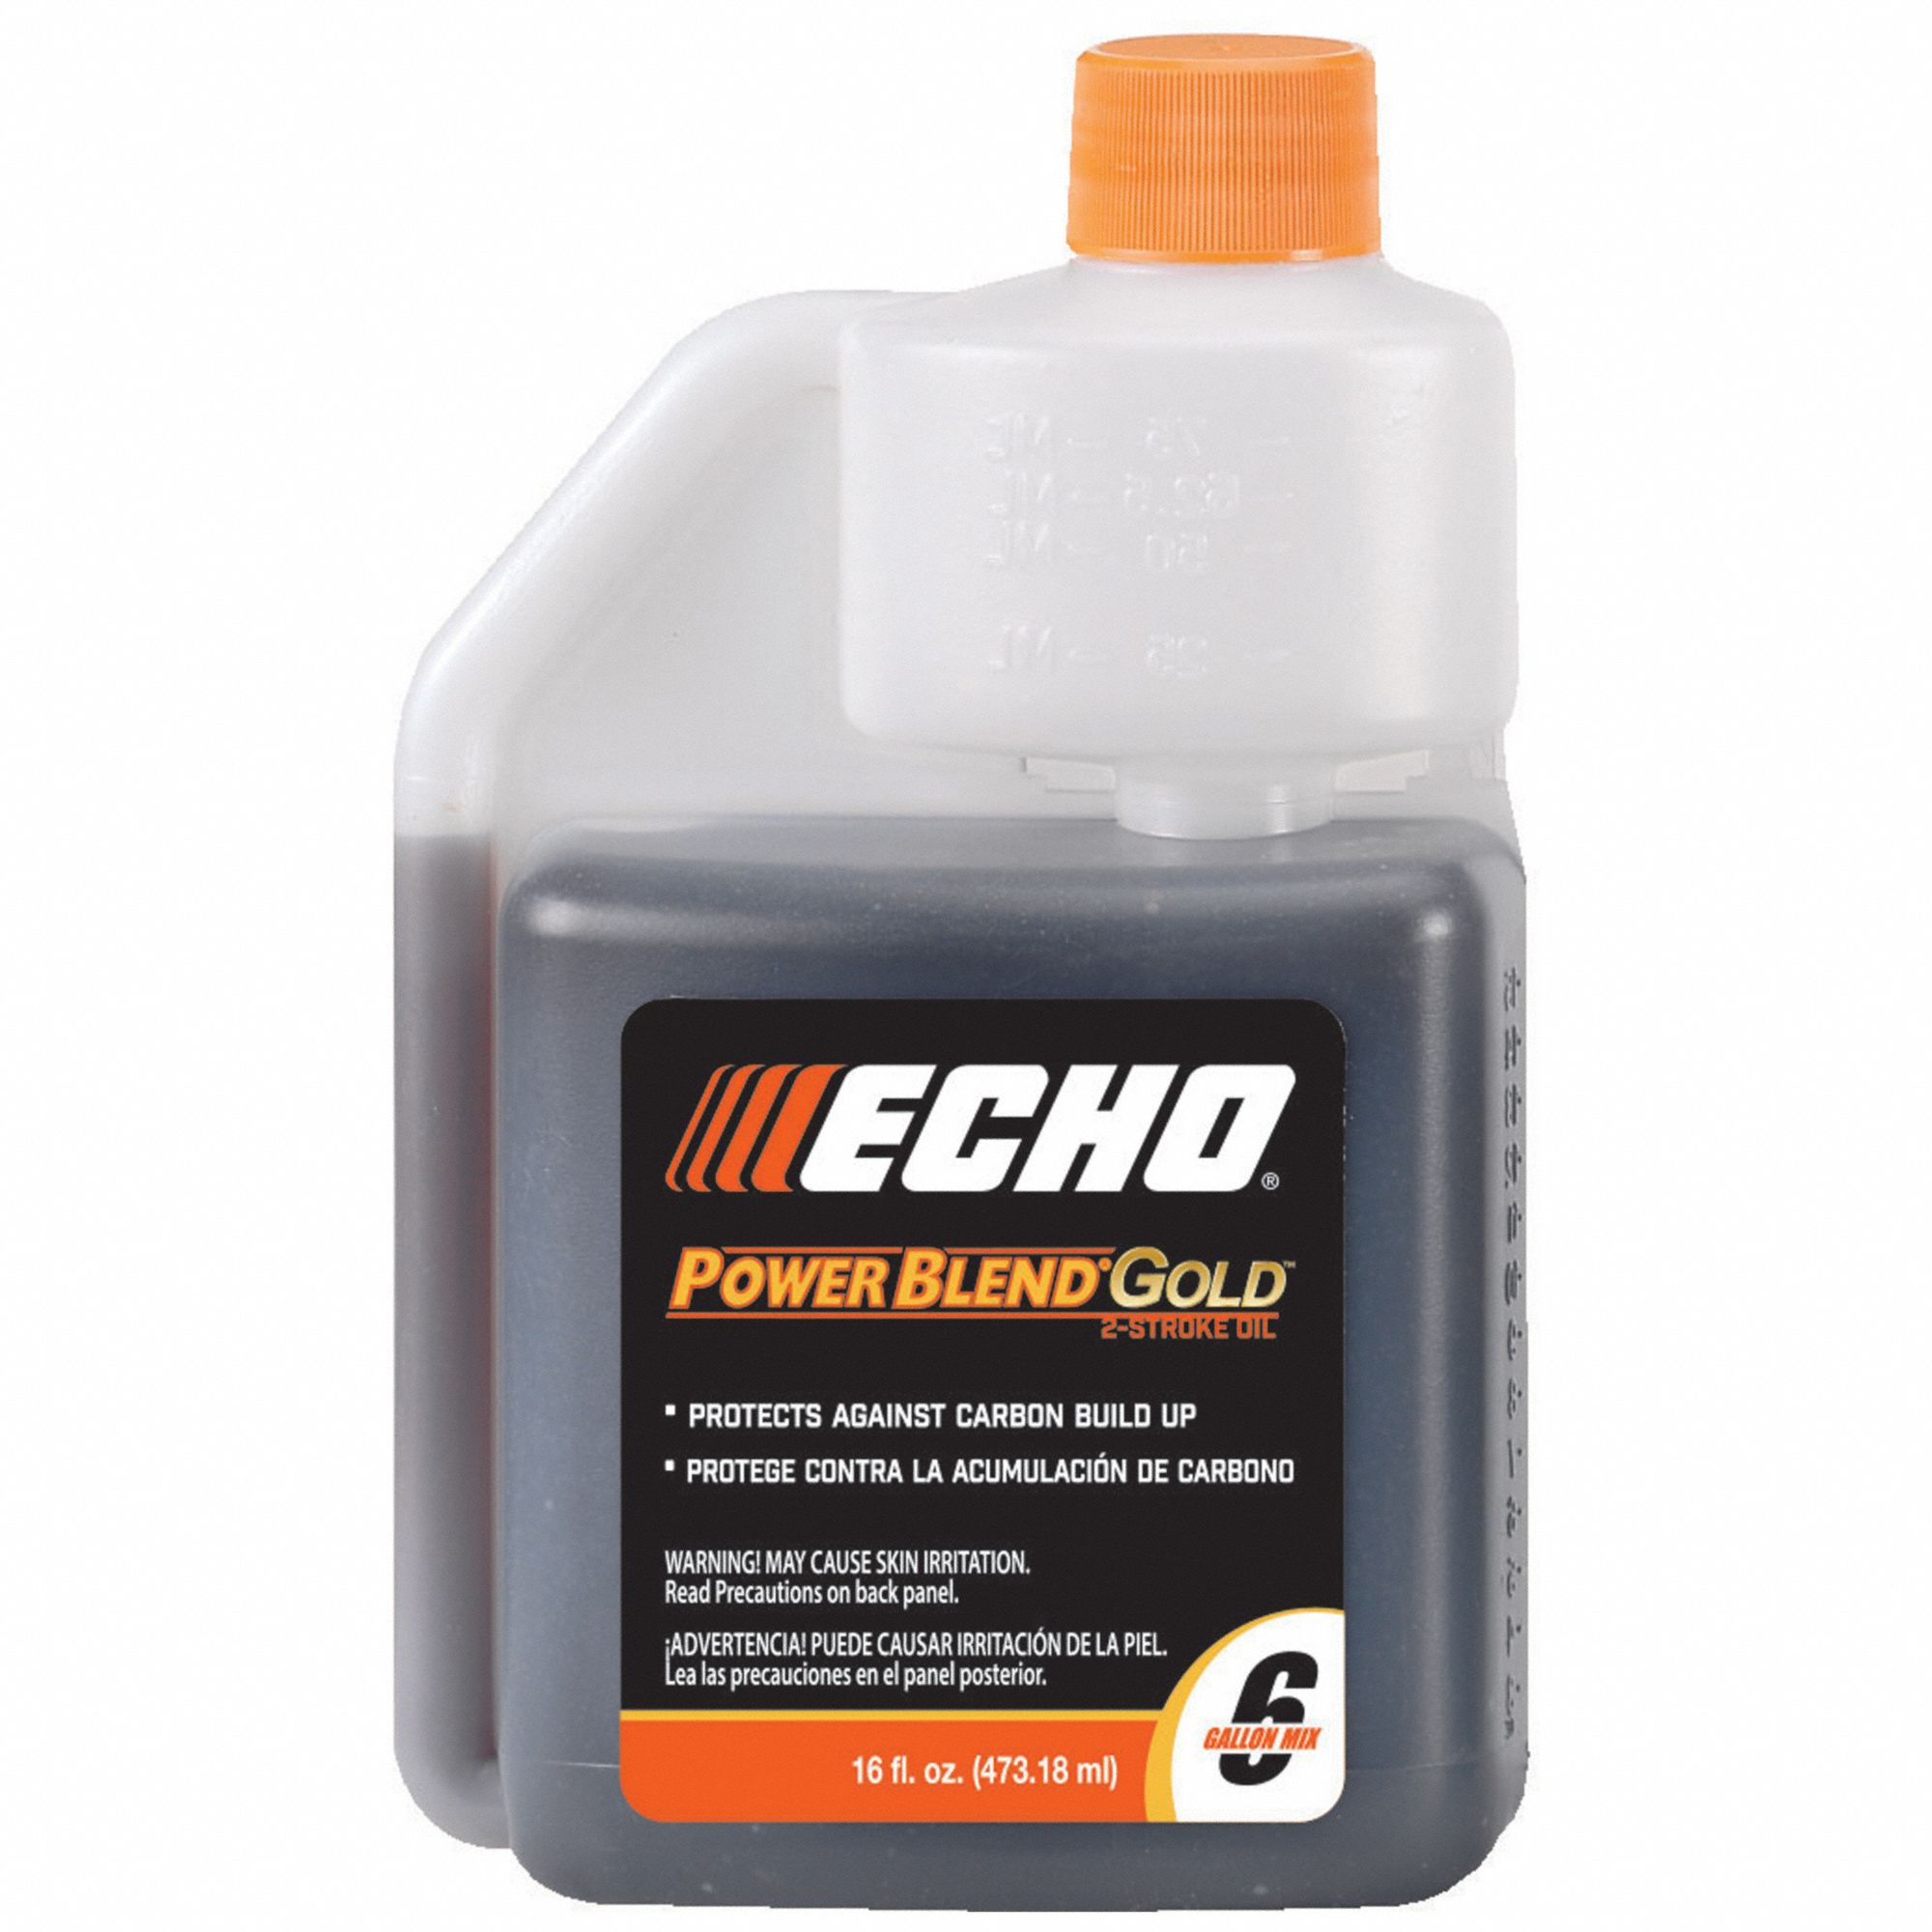 How to mix 2 stroke engine oil